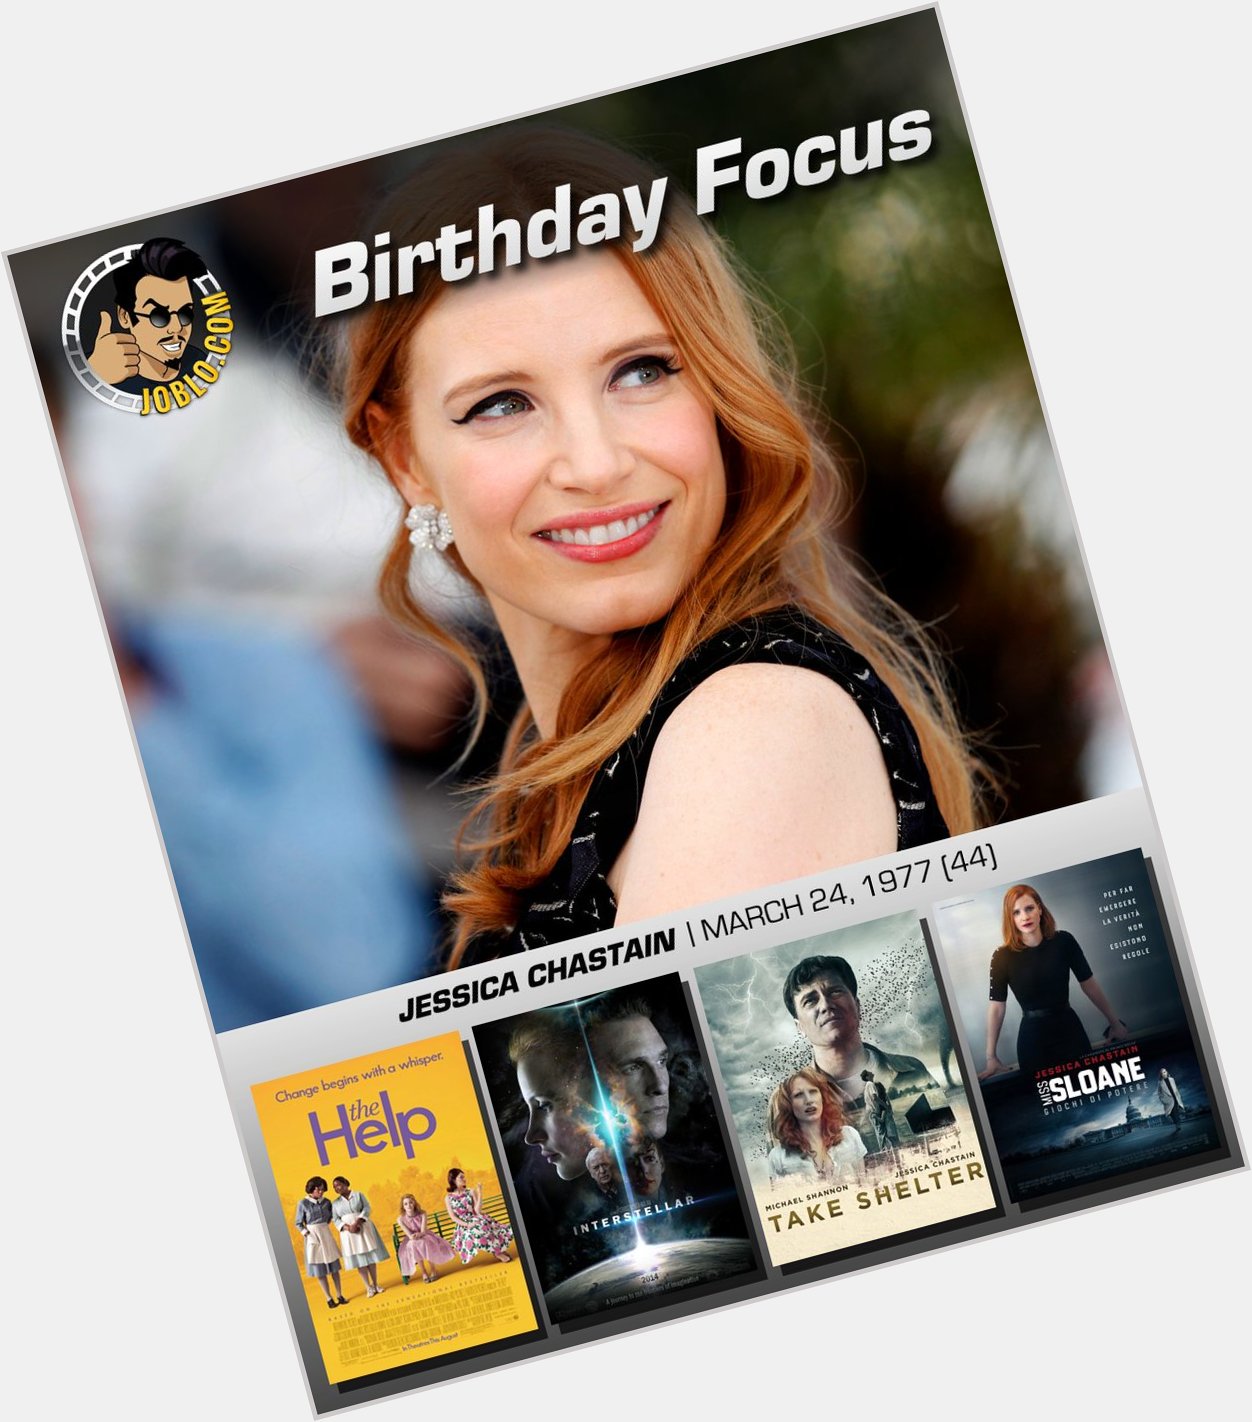 Wishing Jessica Chastain a very happy 44th birthday!

What is your favorite film role of hers? 